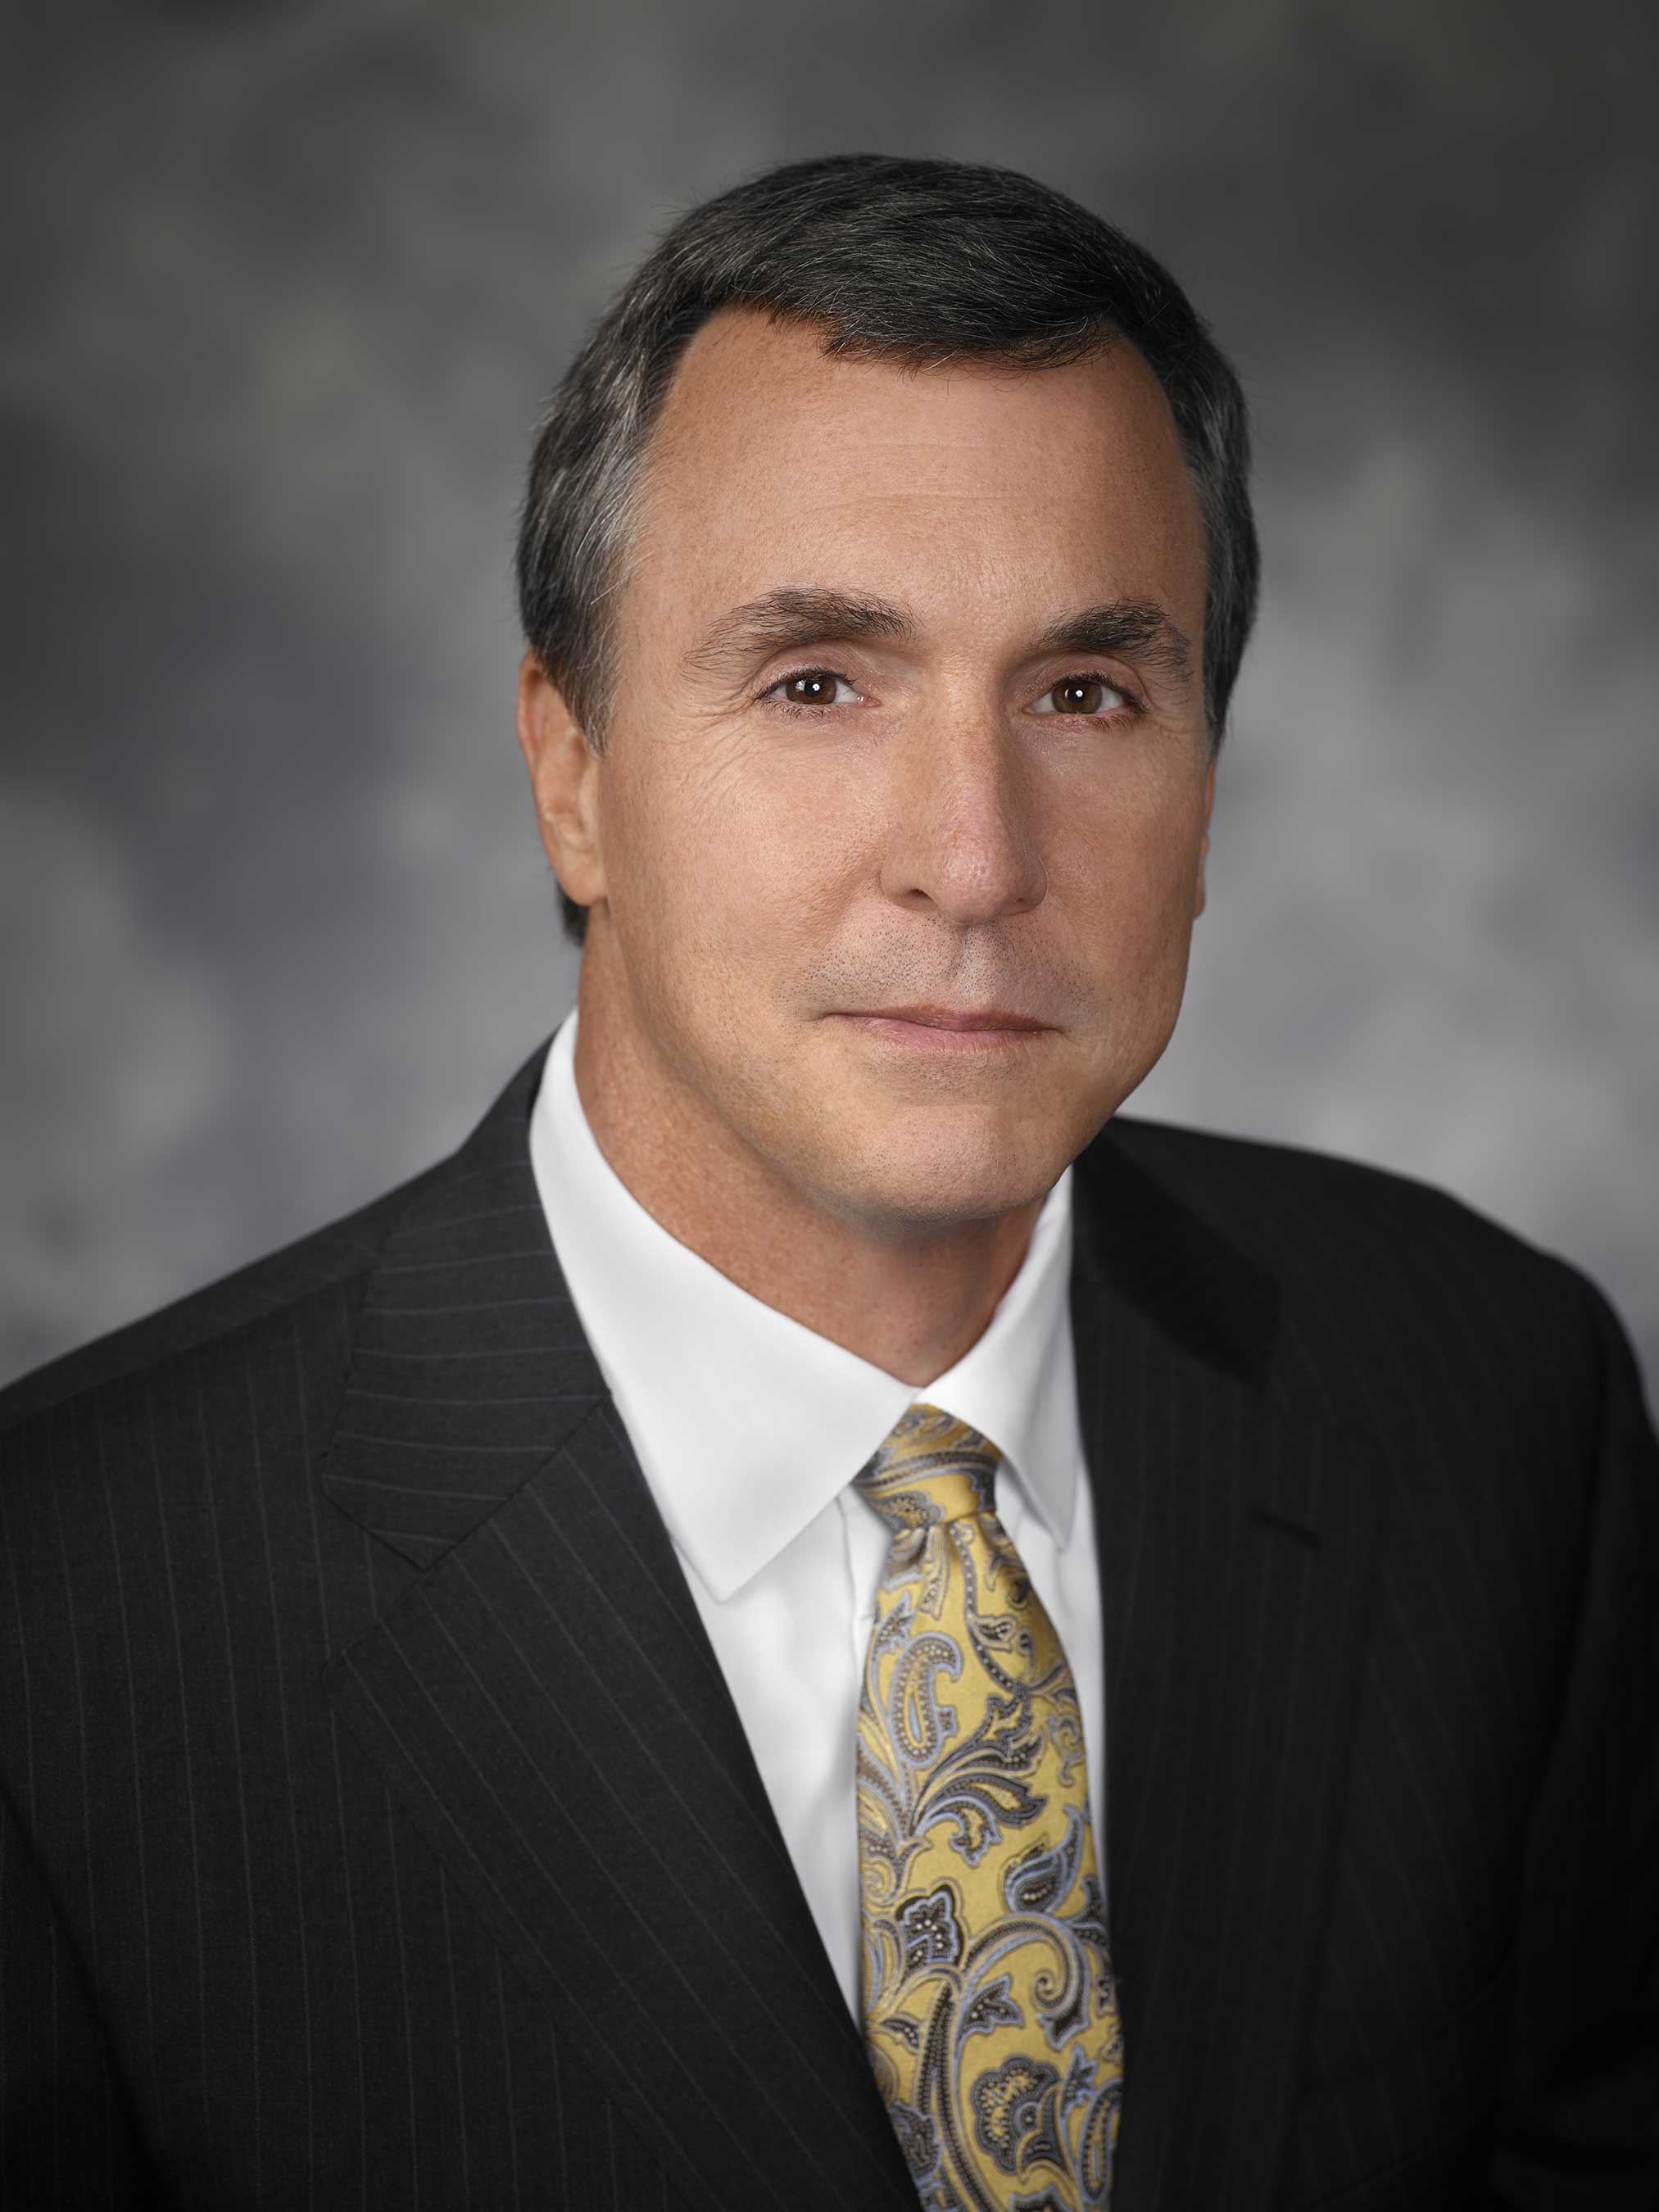 Brian Philips, president and chief executive officer